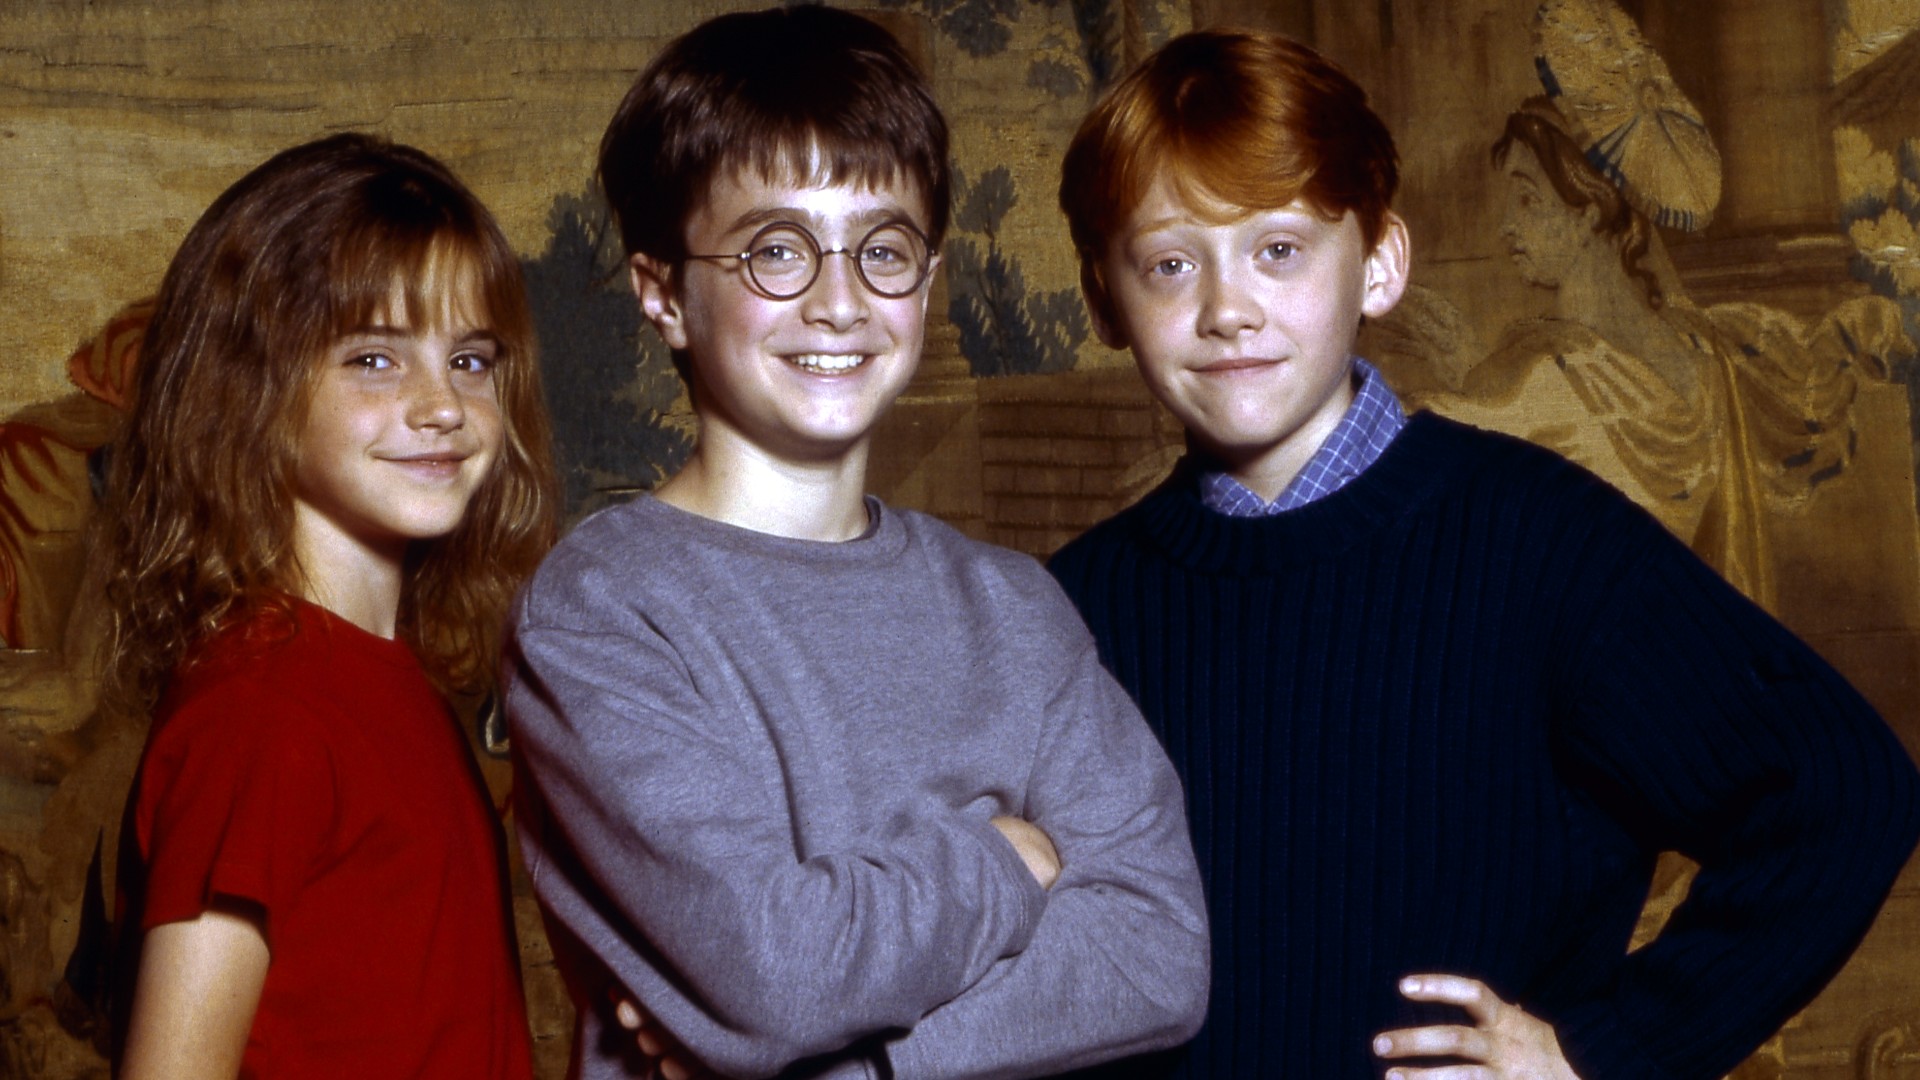 'Harry Potter' Stars Daniel Radcliffe, Emma Watson, and Rupert Grint to Reunite for TV Special